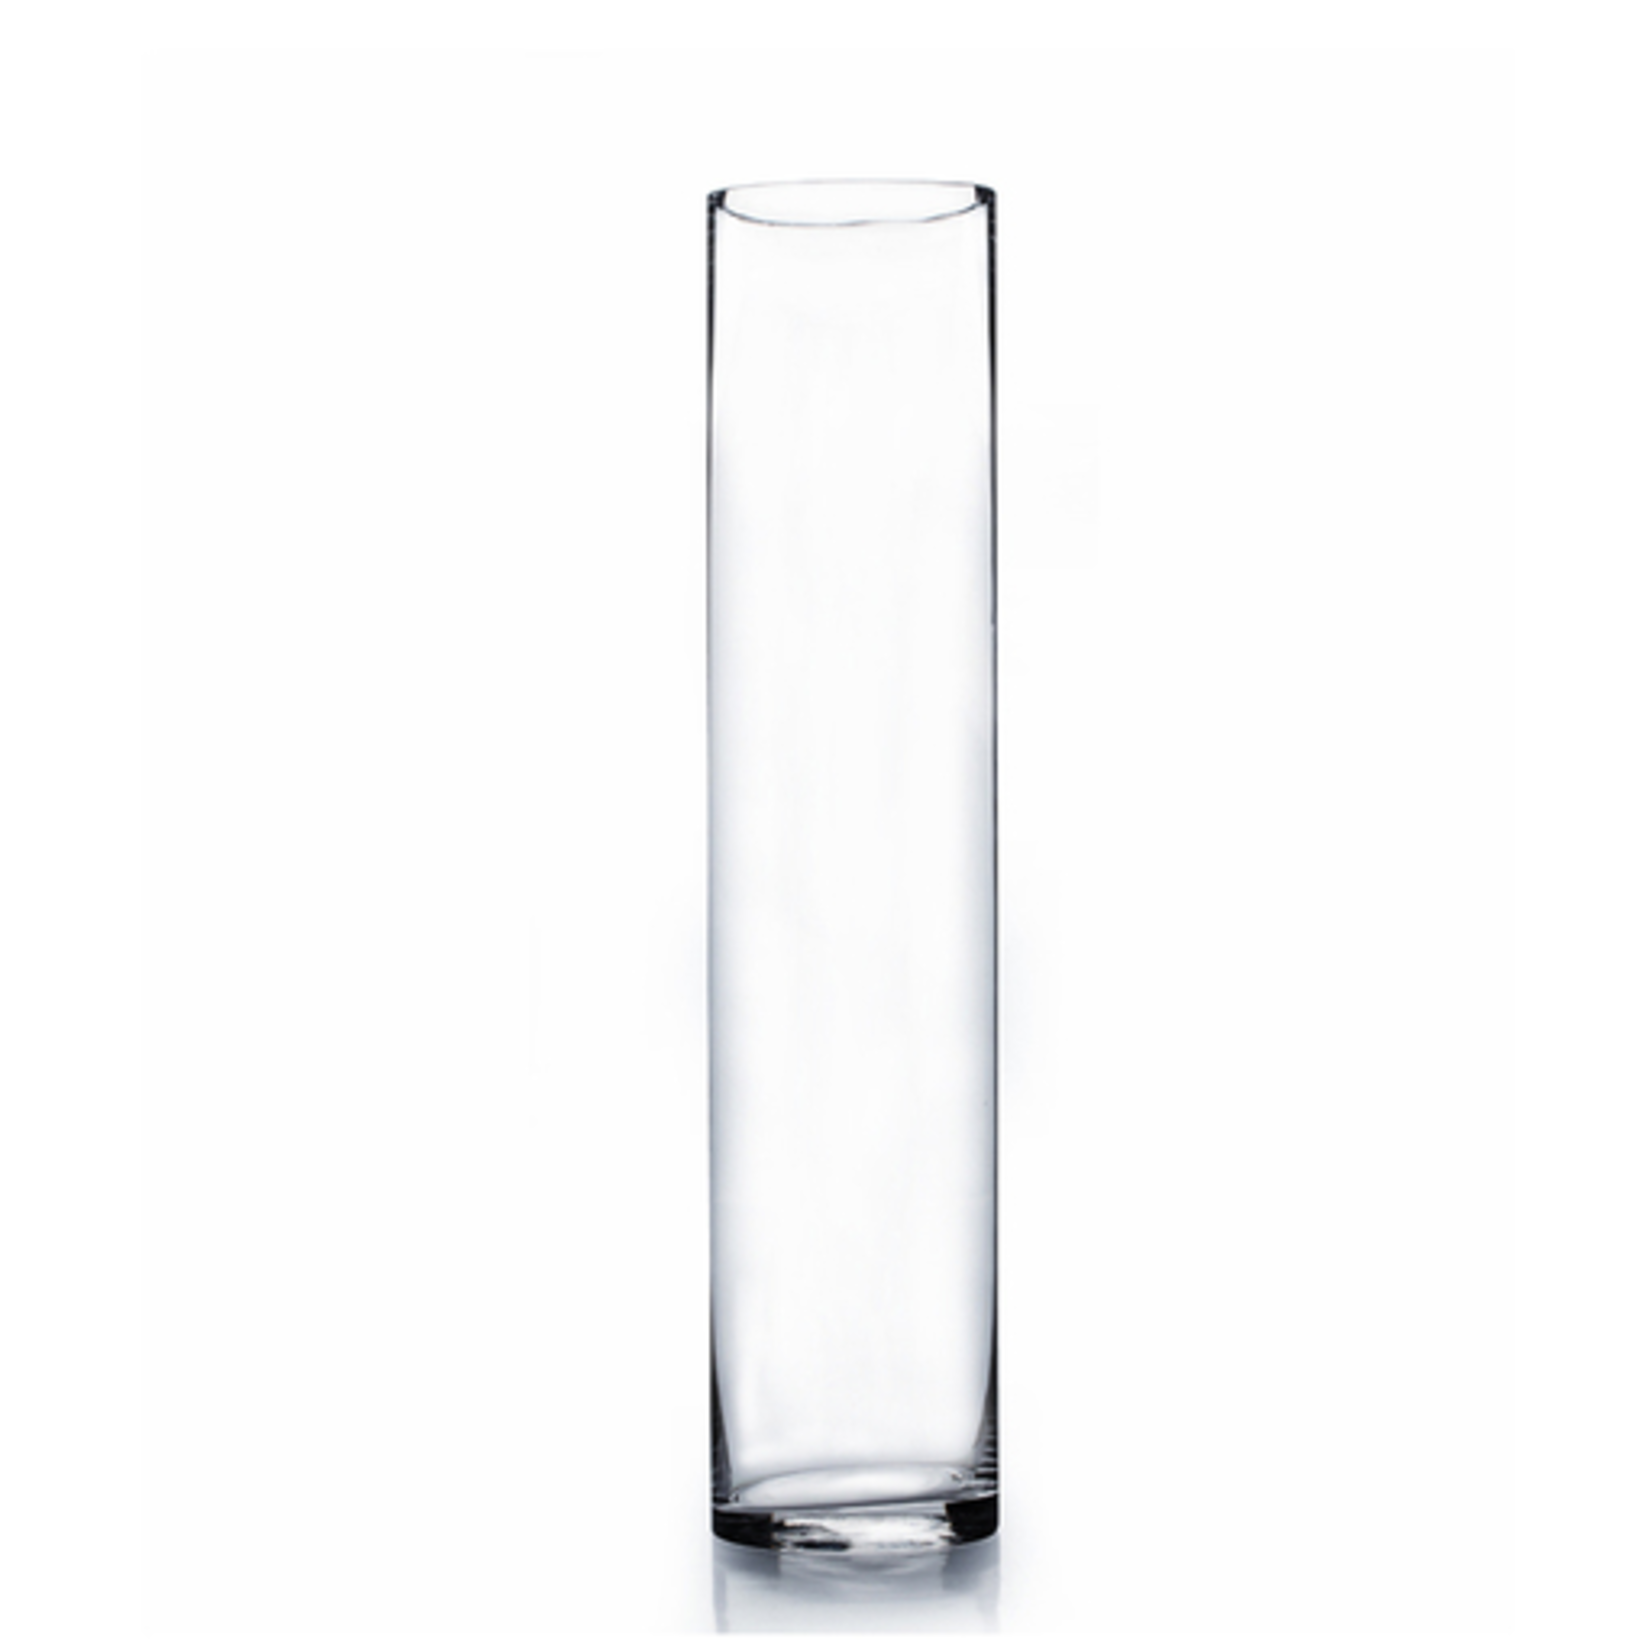 32"H X 4" CLEAR GLASS CYLINDER VASE